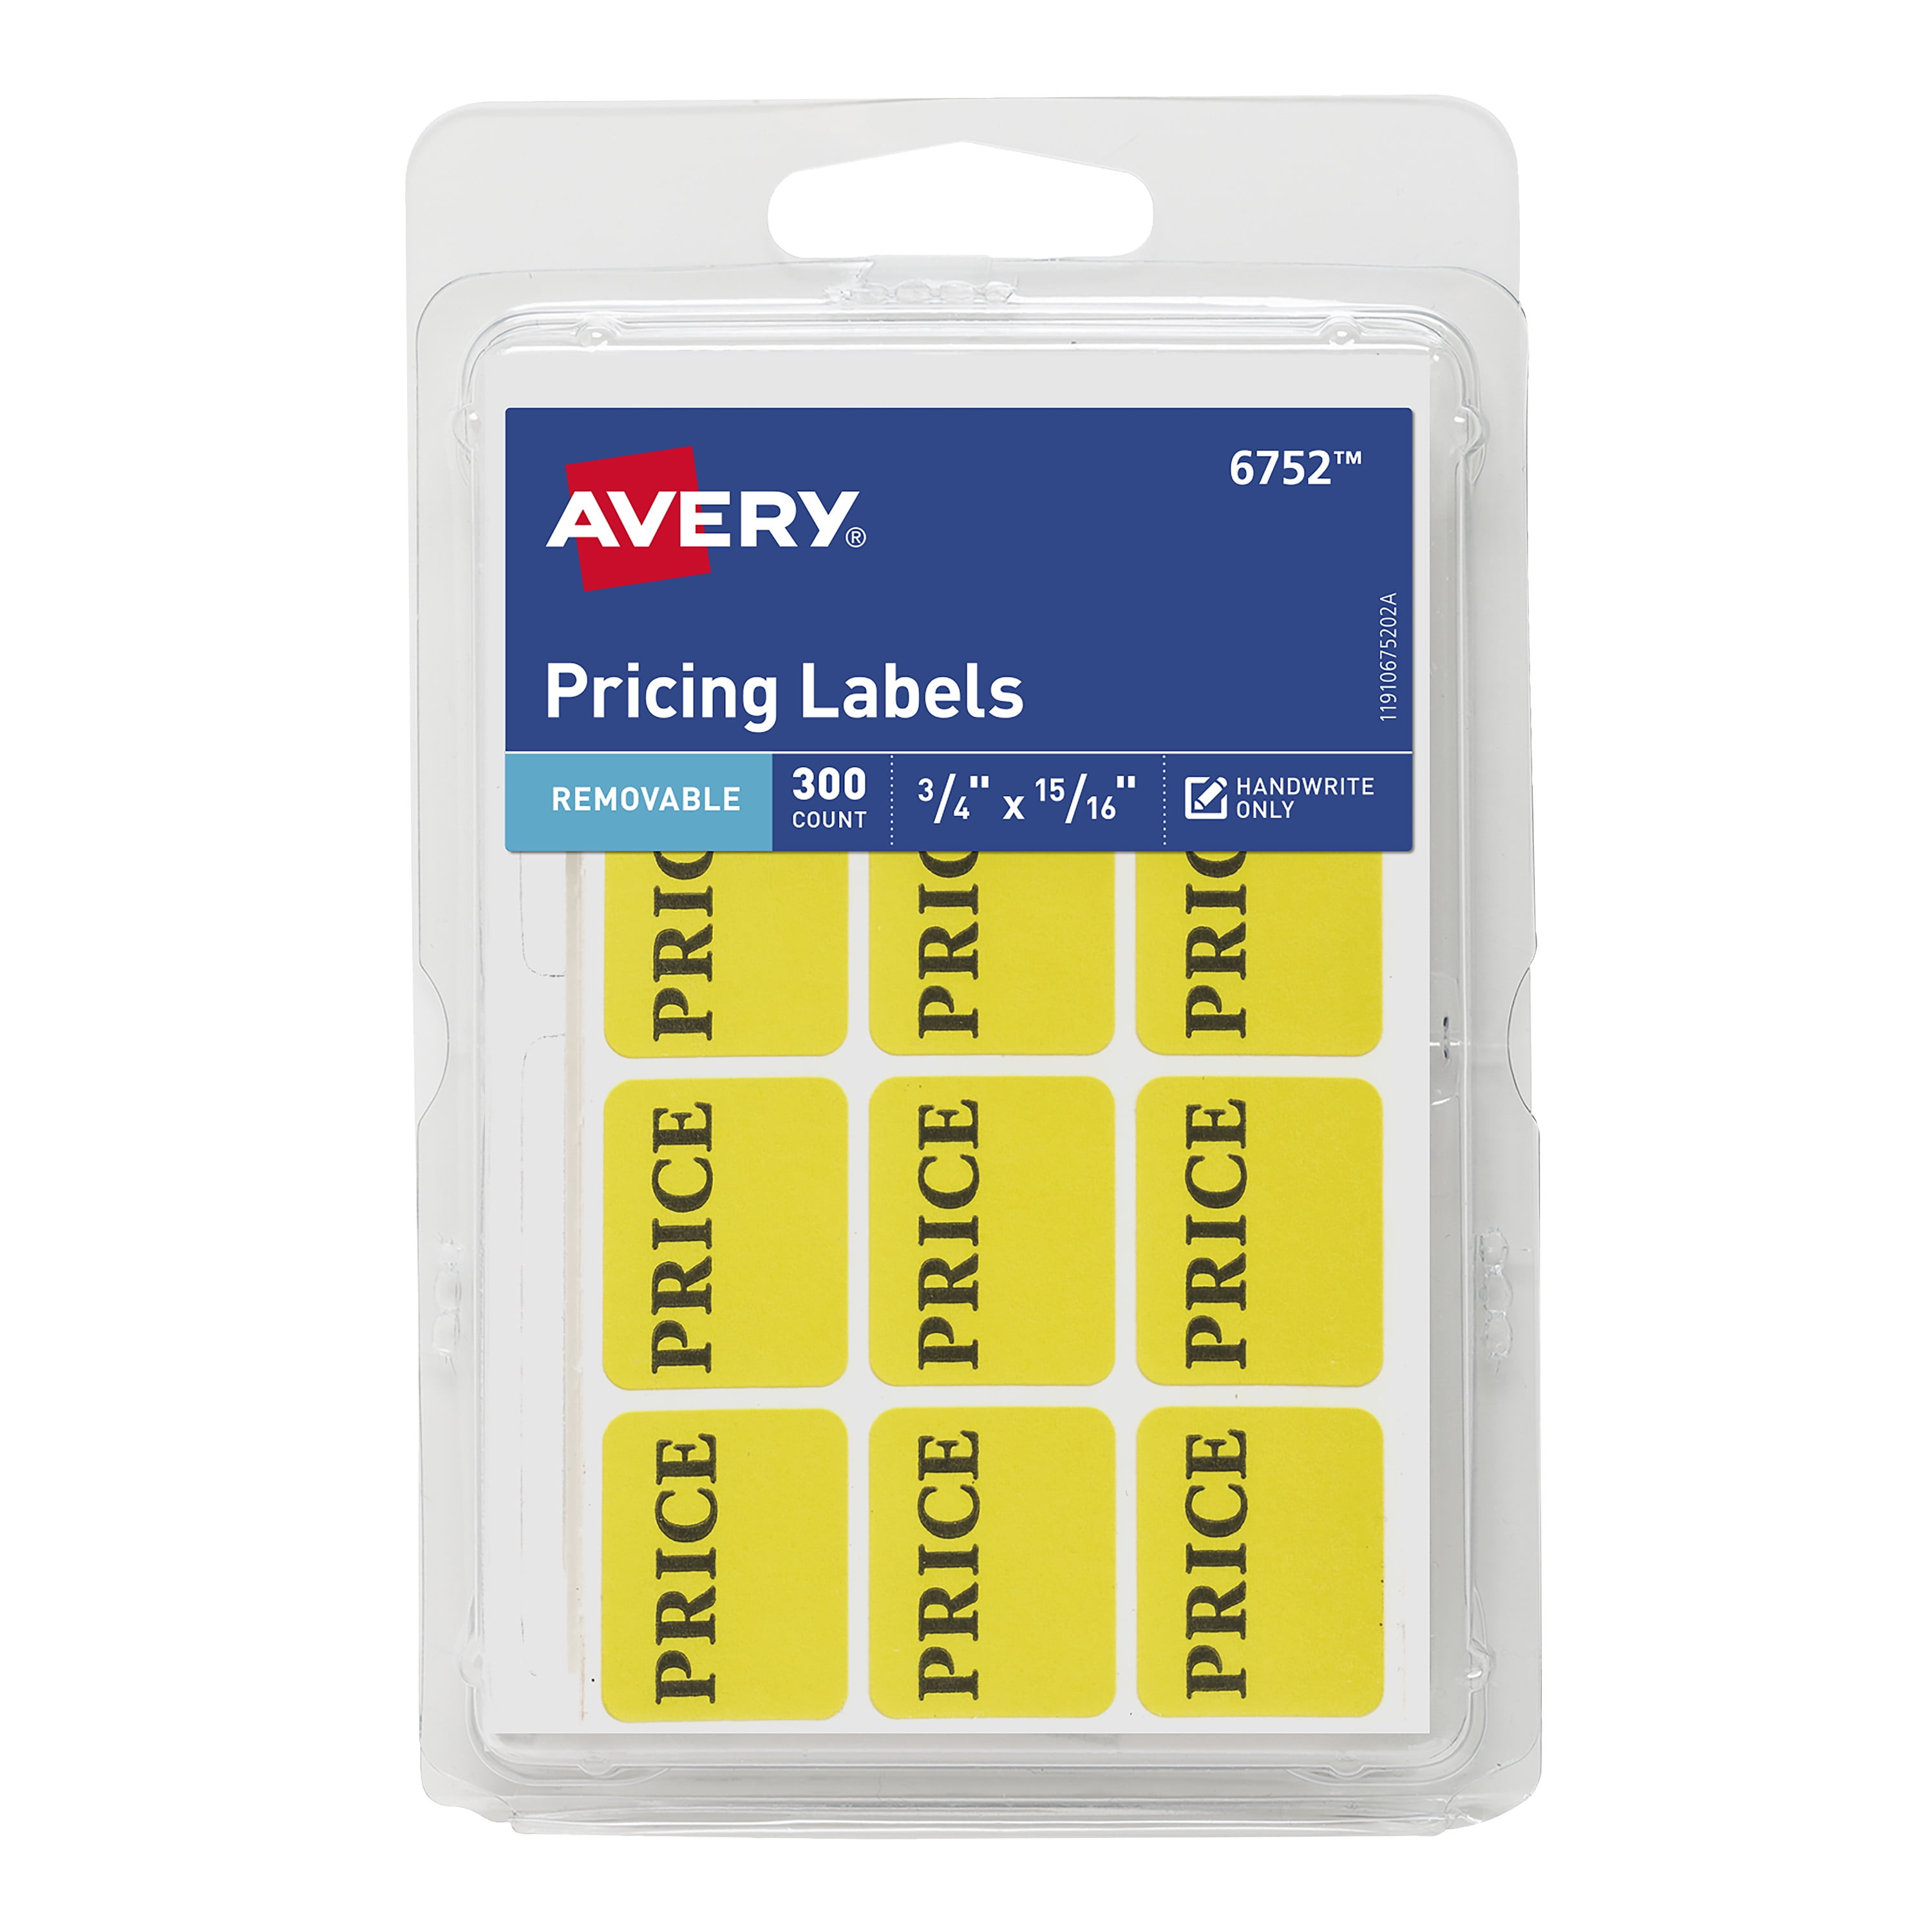 Avery Pricing Labels Yellow 34 X 1516 Removable Handwrite 300